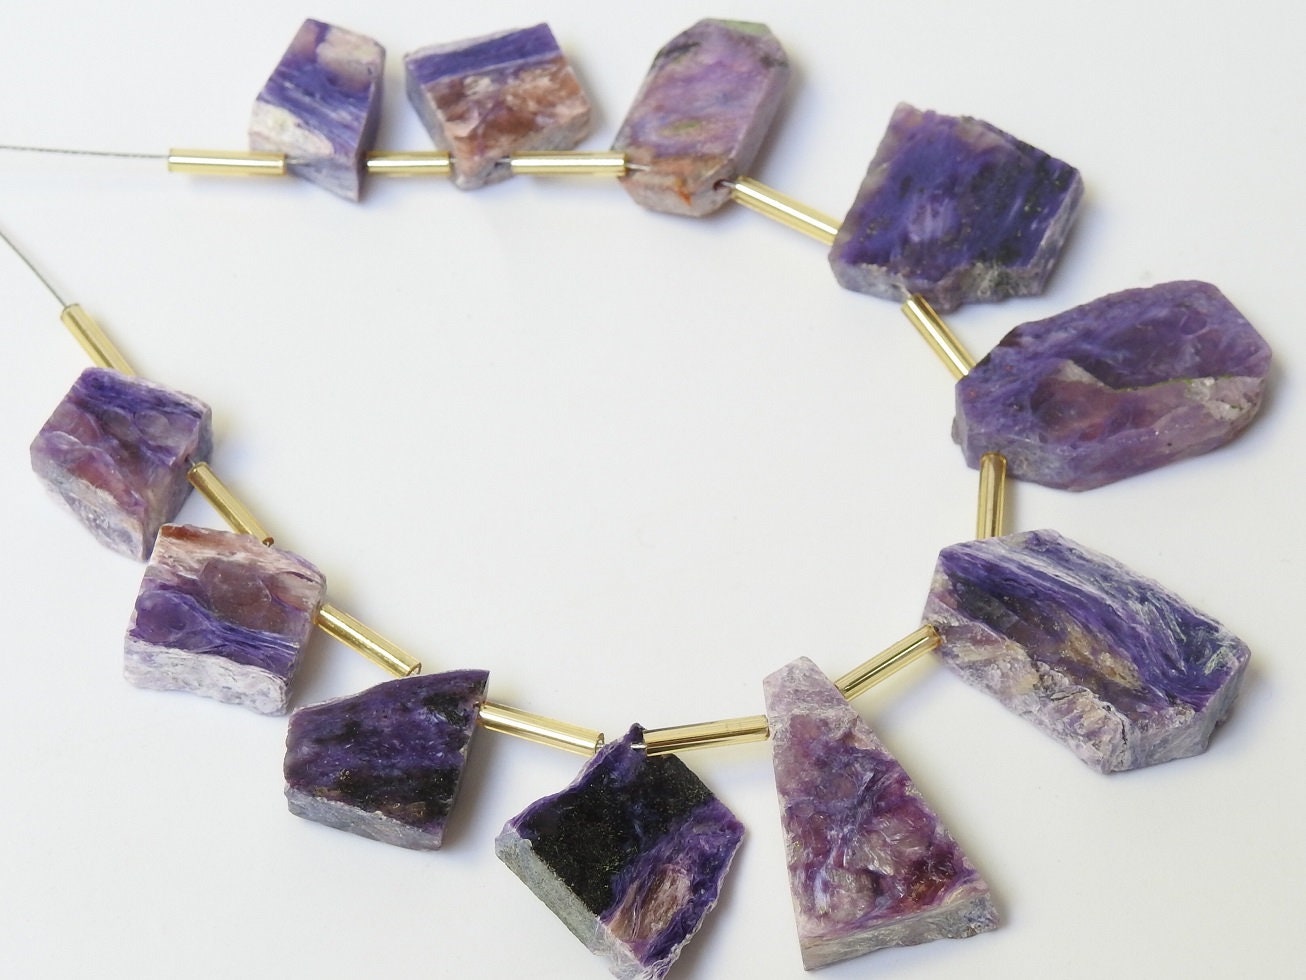 Charoite Polished Rough Slice,Slab,Stick,Loose Raw,11Piece Strand 24X11To12X12MM Approx,Wholesaler,Supplies,100%Natural PME-R4 | Save 33% - Rajasthan Living 16